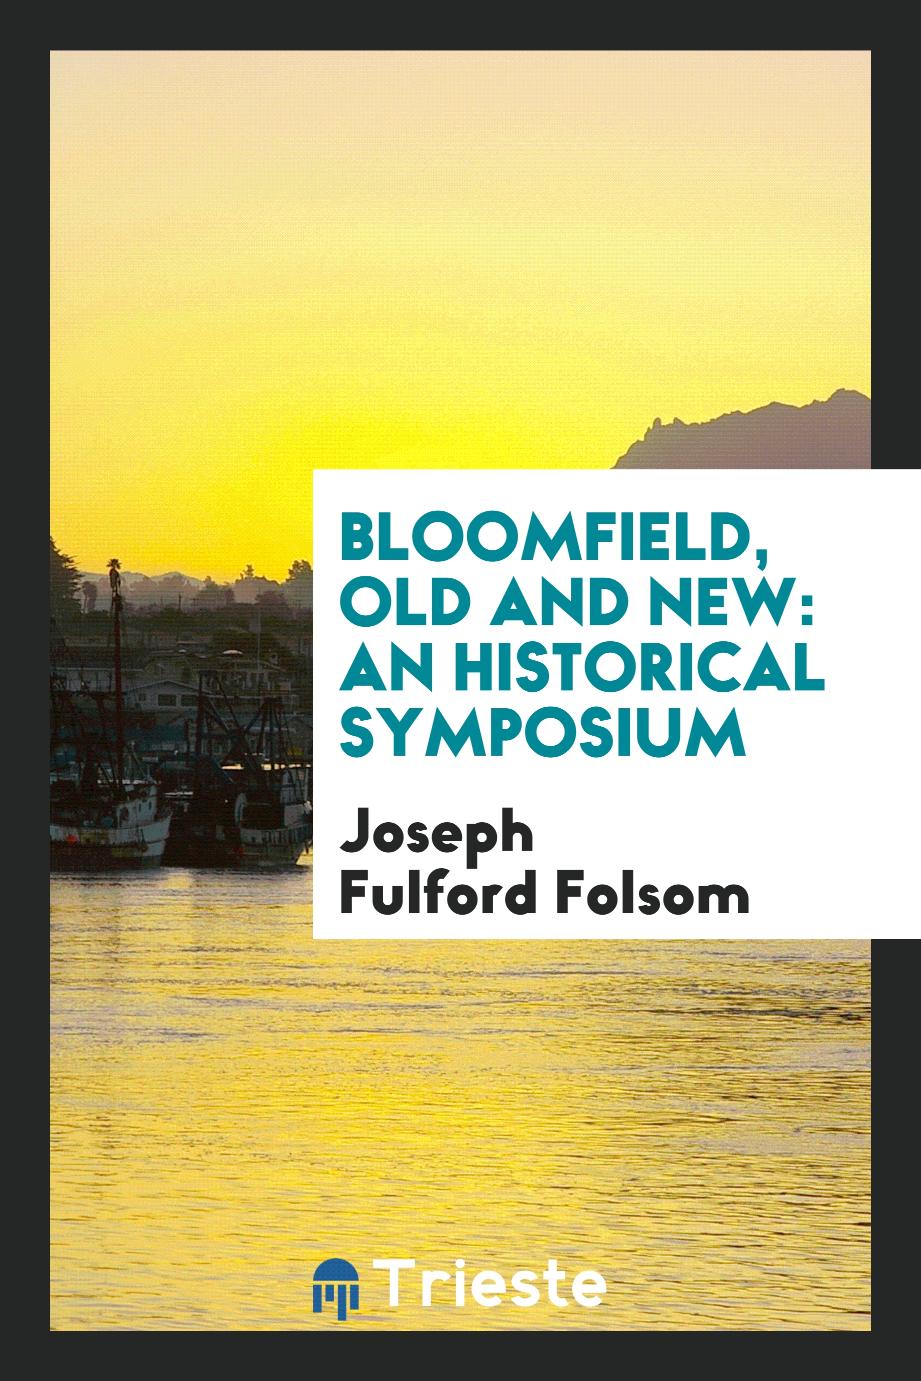 Bloomfield, old and new: an historical symposium